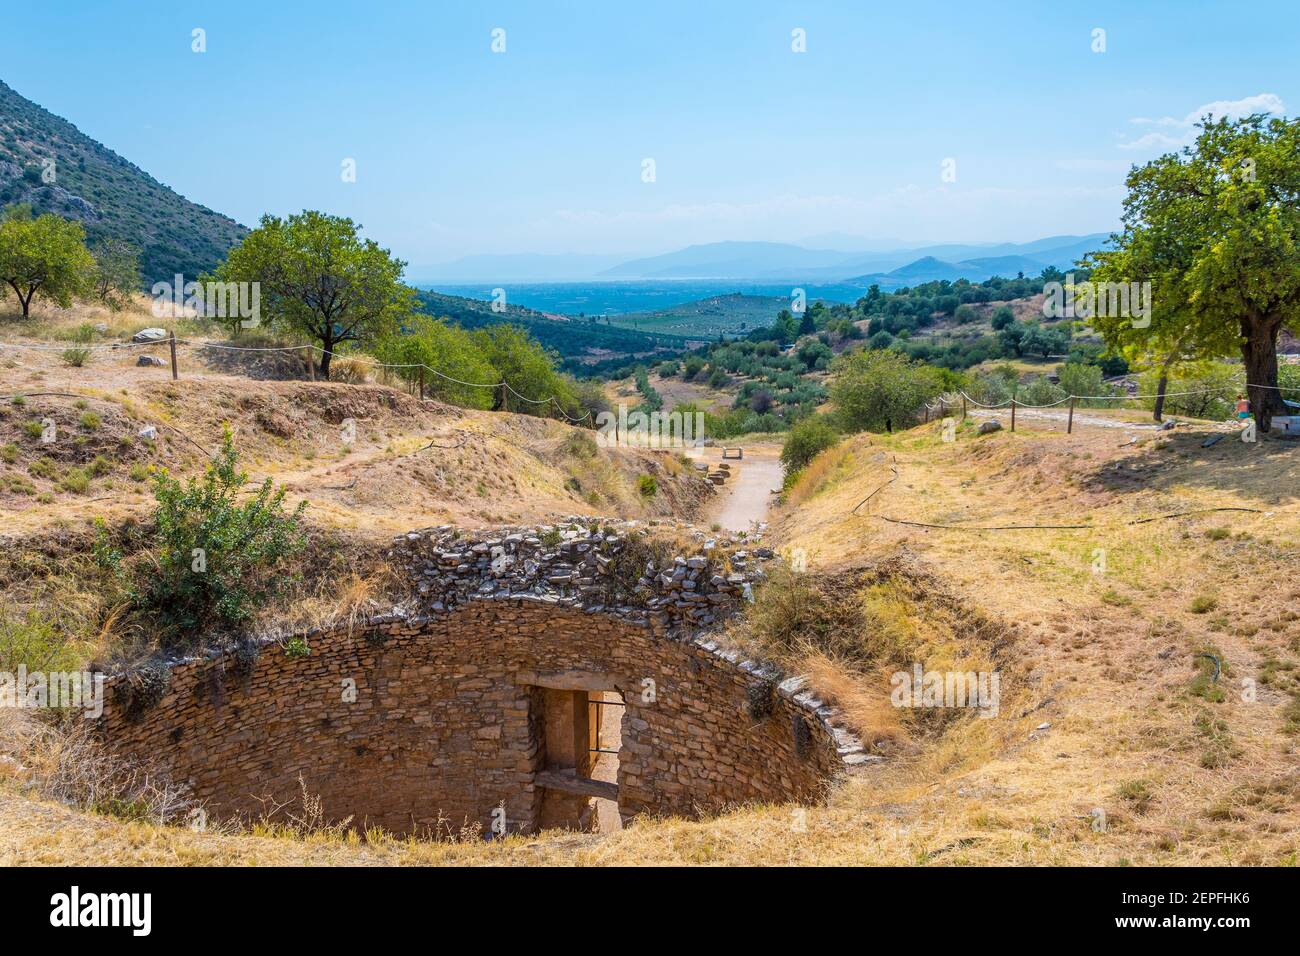 The upper part of the Tomb of Aegisthus or Aigistos of the citadel of Mycenae that has fallen. Archaeological site of Mycenae in Peloponnese, Greece Stock Photo